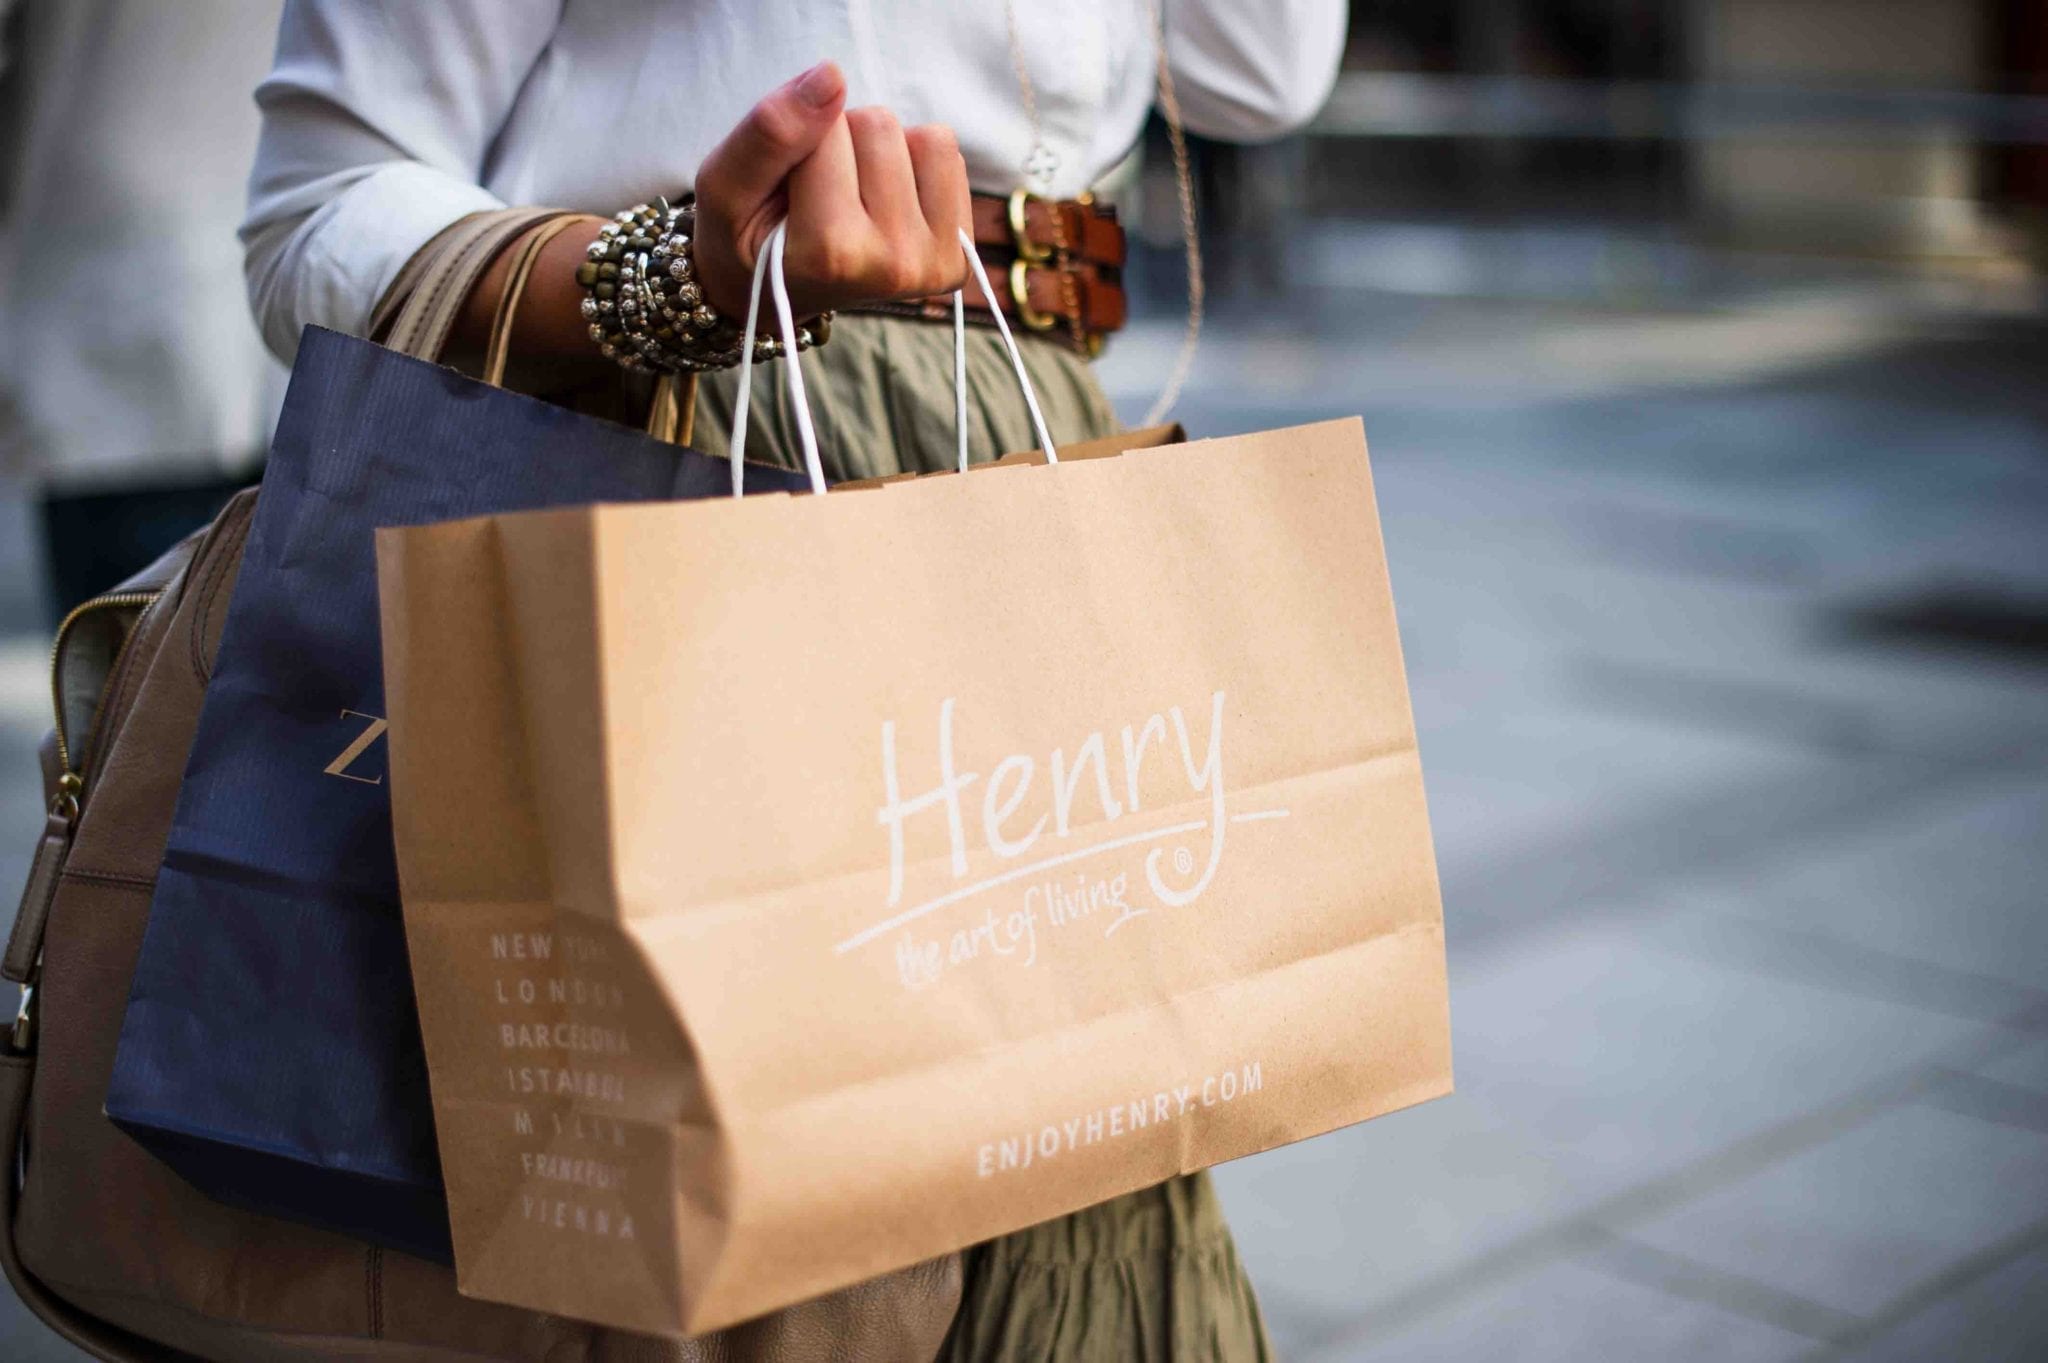 why people buy represented by hand holding shopping bags